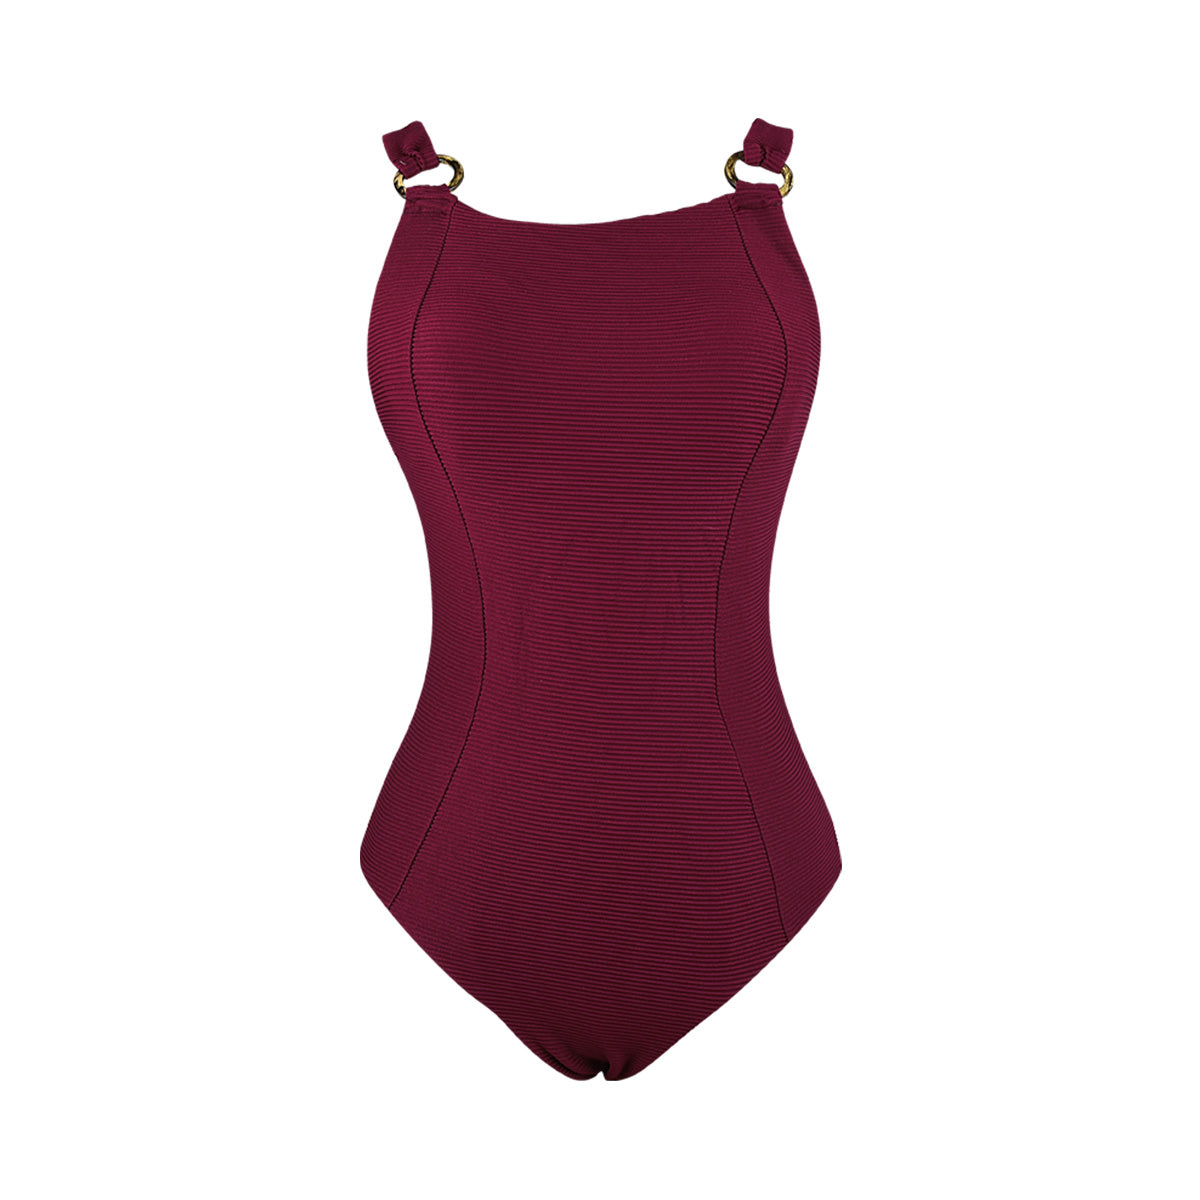 classic-one-piece-cheeky-butt-bikini-with-ring-connectors_all_wine_4.jpg